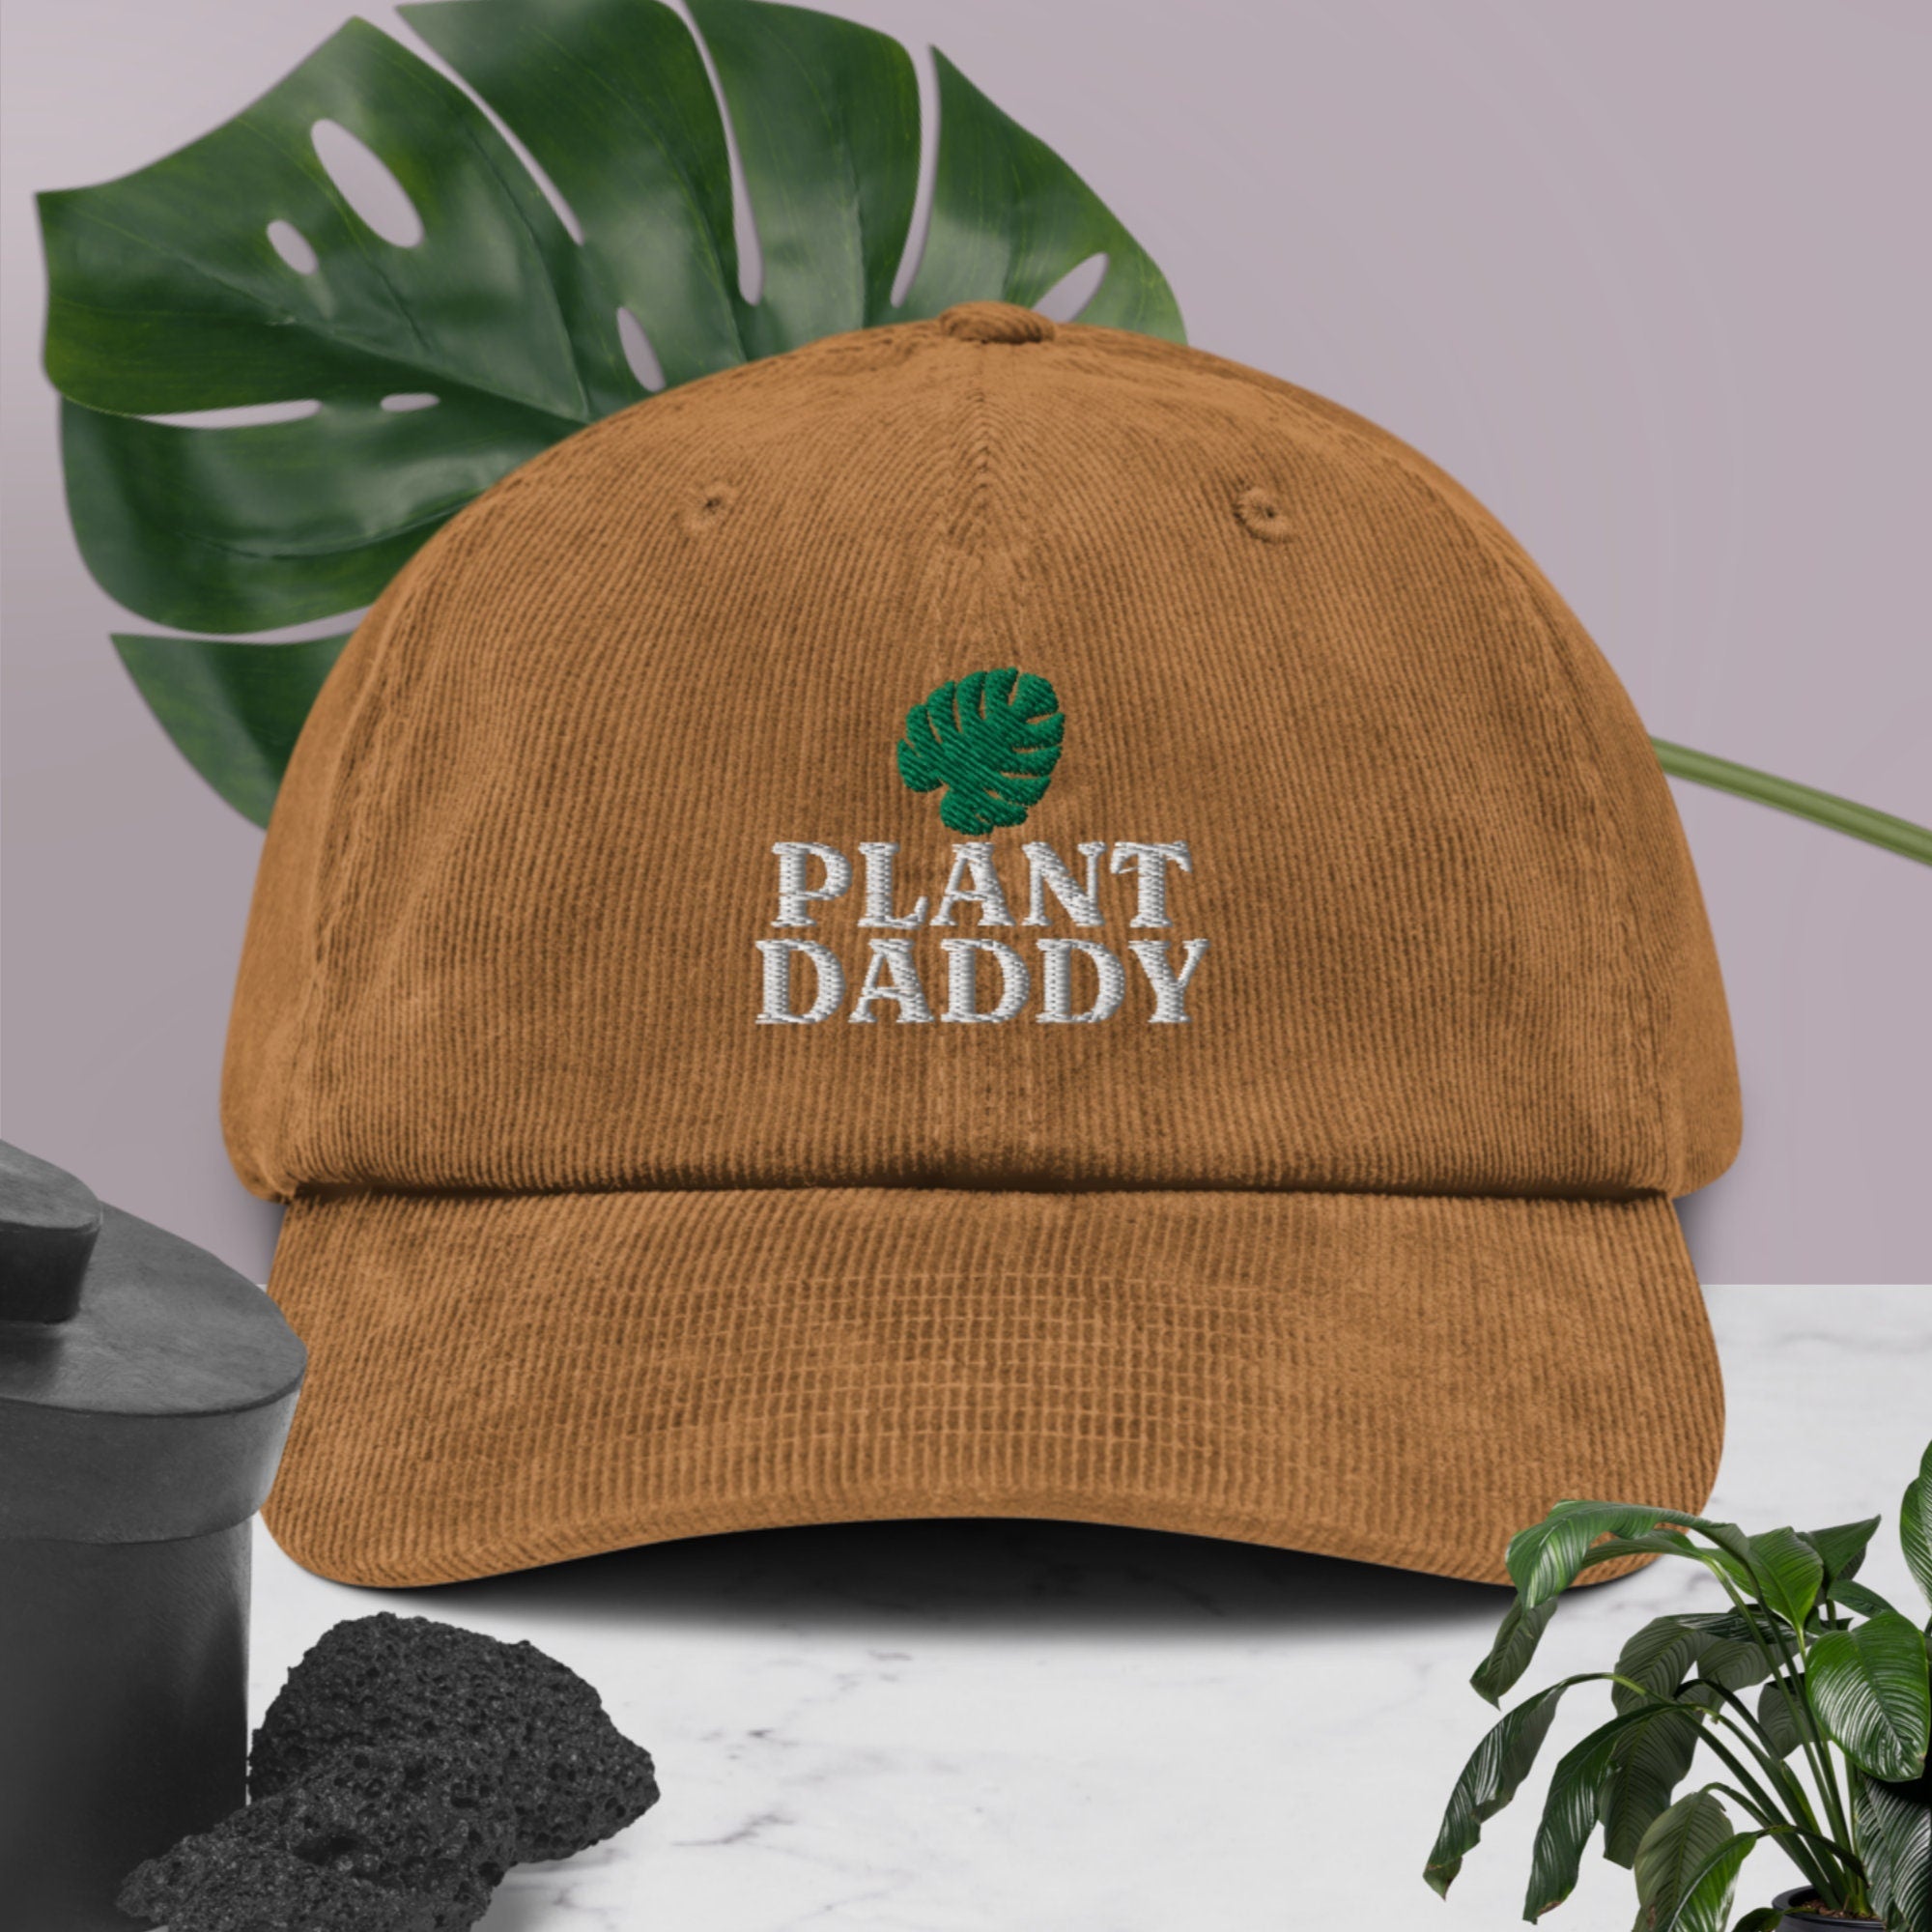 Plant Daddy Corduroy Dad Hat, Plant Lover Gift, Monstera Dad Hat Gift, Plant Daddy Handmade Embroidered Corduroy Dad Hat - Multiple Colors